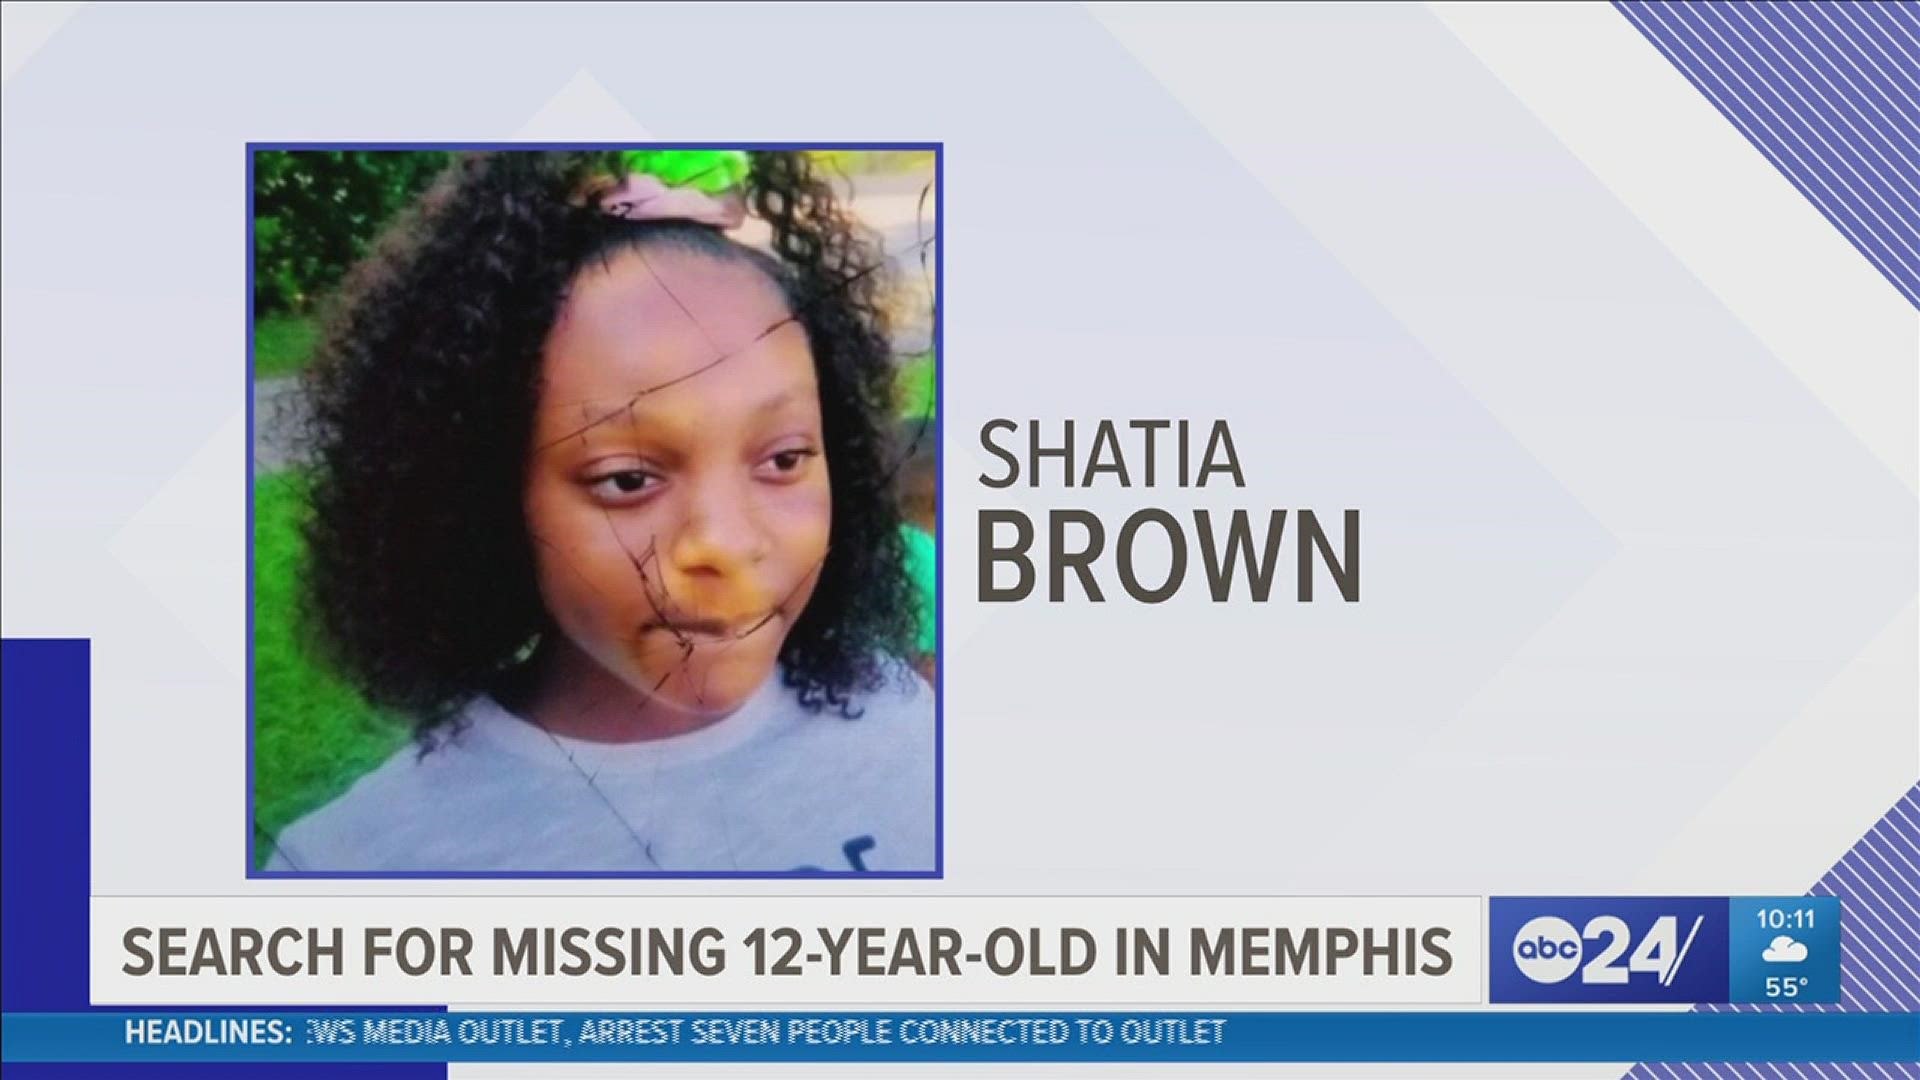 Shatia Brown was last seen around 5pm at her home in the 1300 block of Bruce.